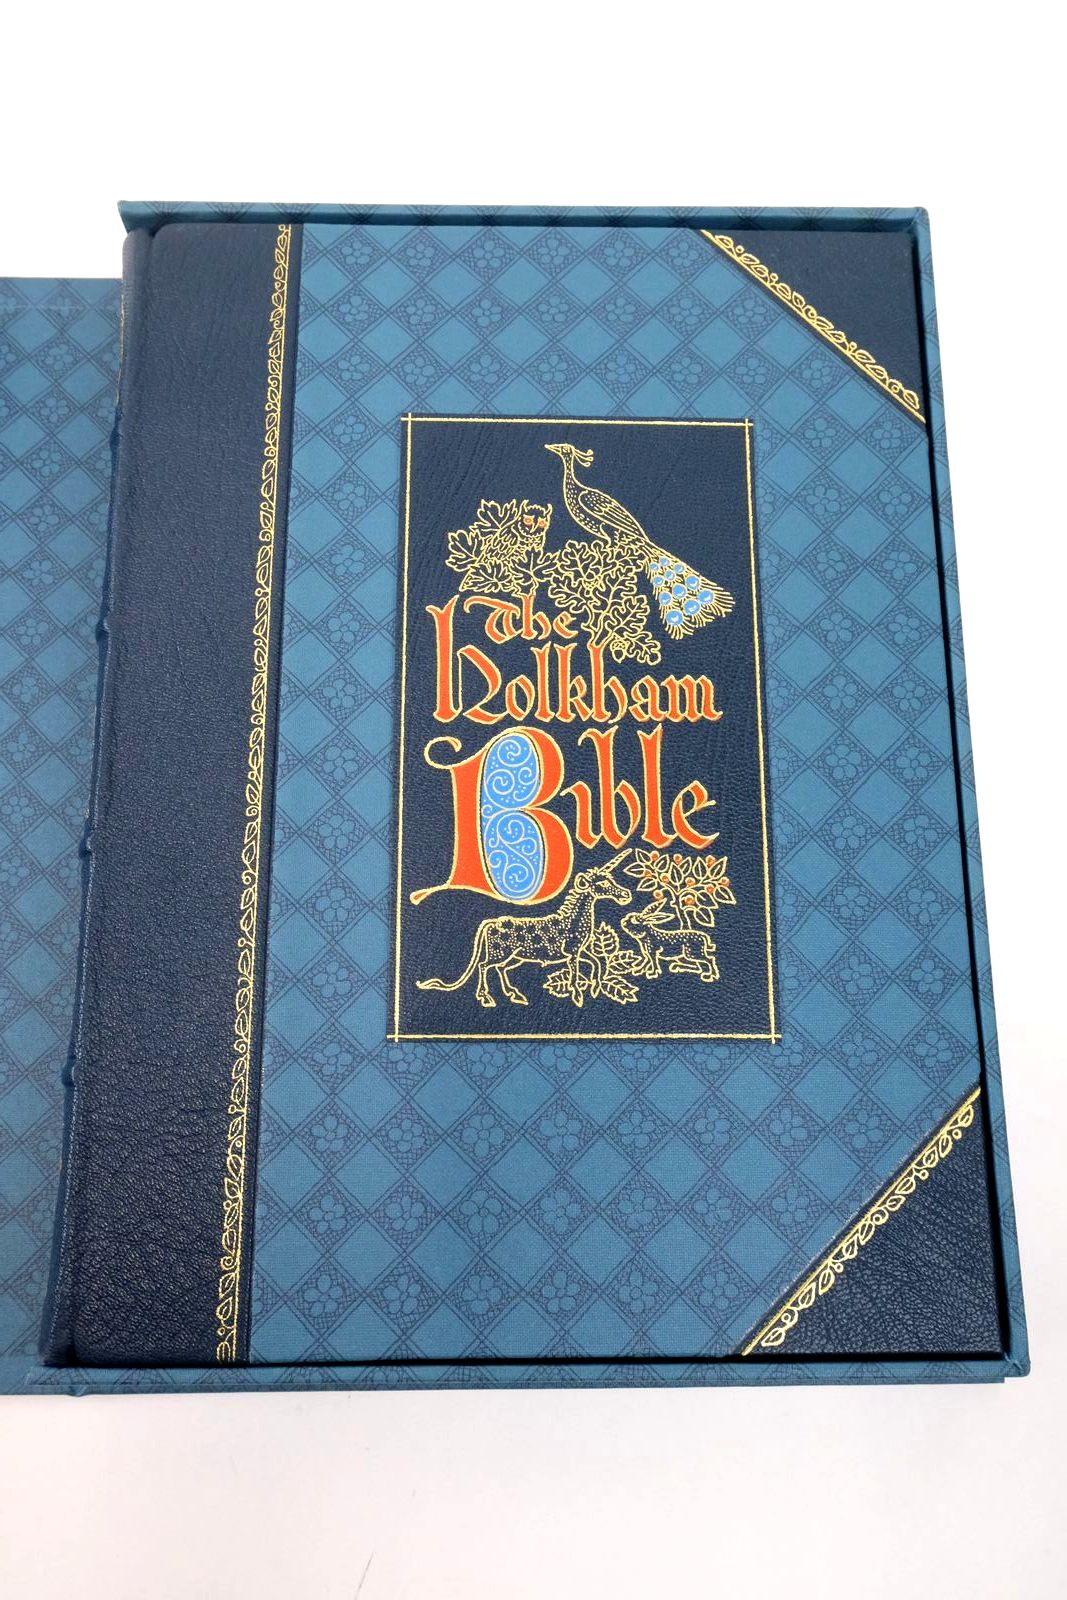 Photo of THE HOLKHAM BIBLE written by Brown, Michelle P. published by Folio Society (STOCK CODE: 1322499)  for sale by Stella & Rose's Books